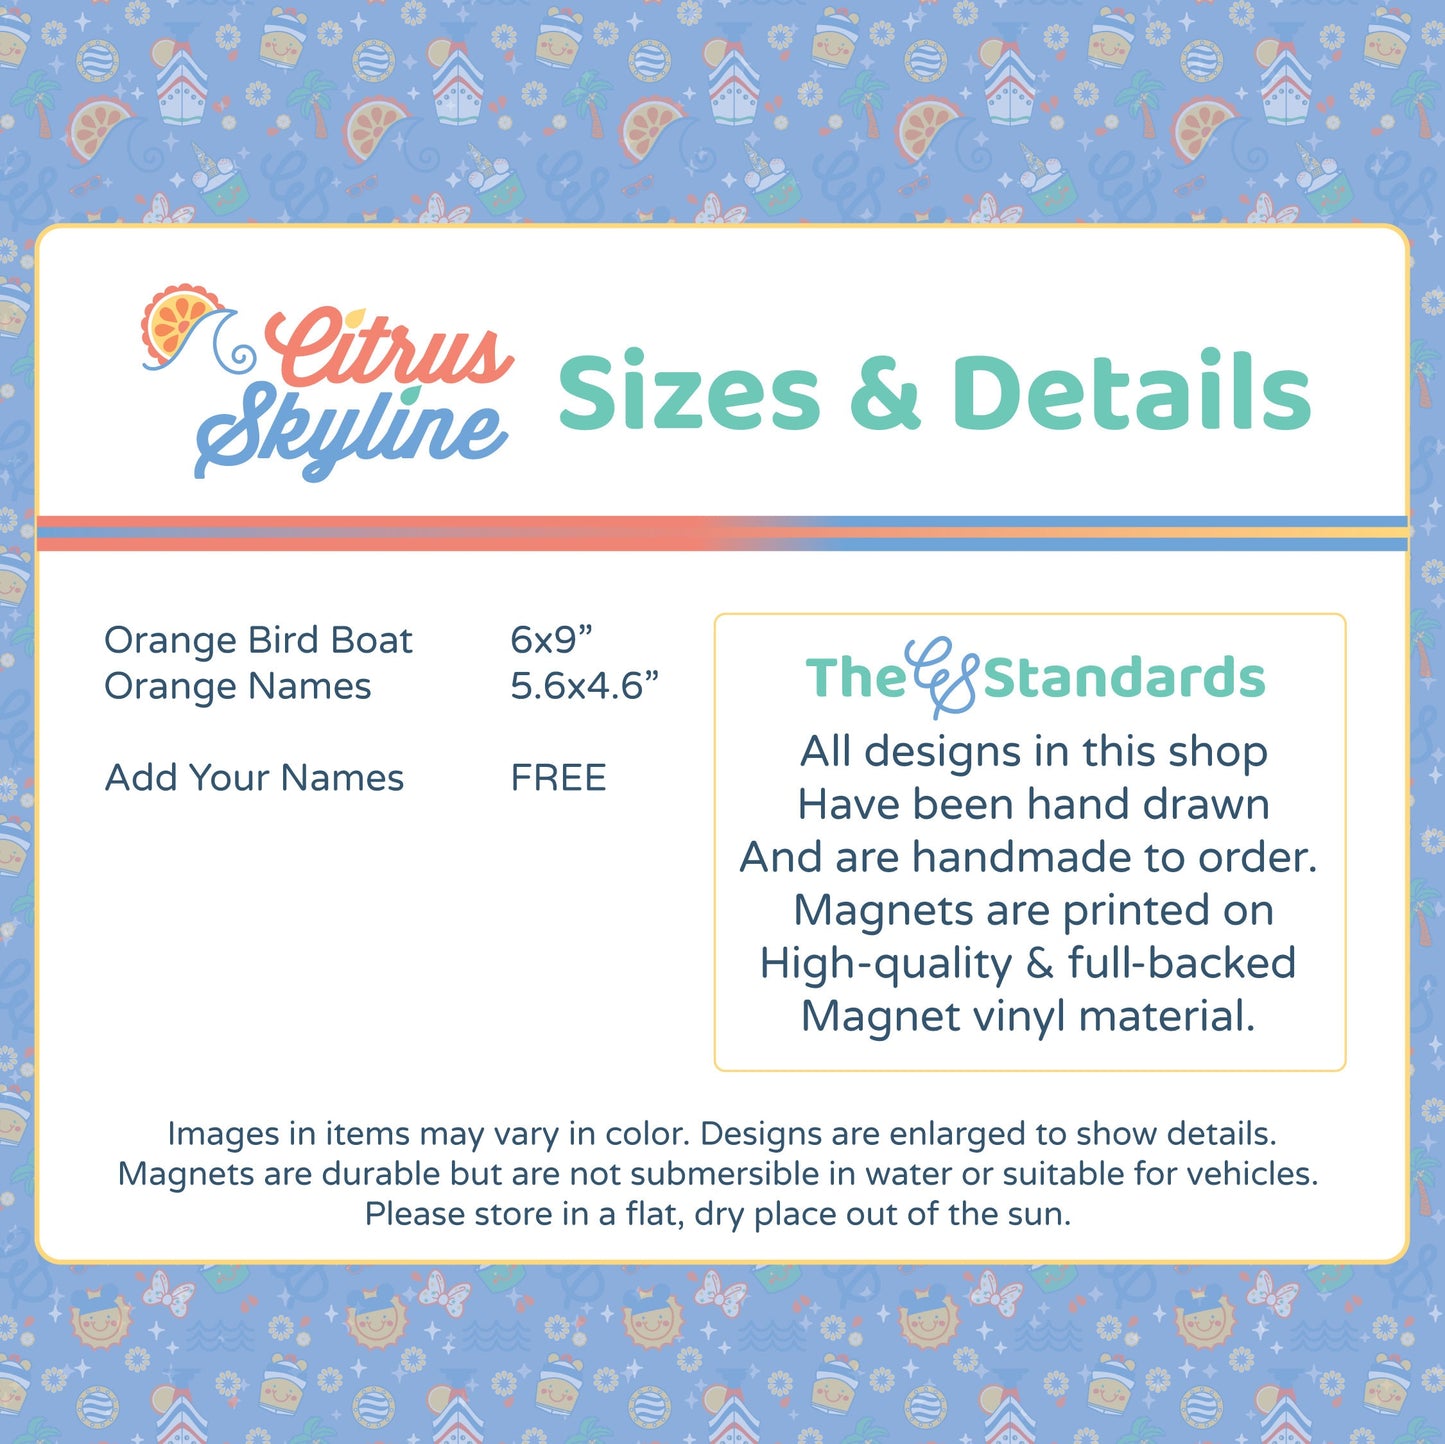 DCL Cruise Magnet: Orange You Glad We Are On A Cruise Customizable